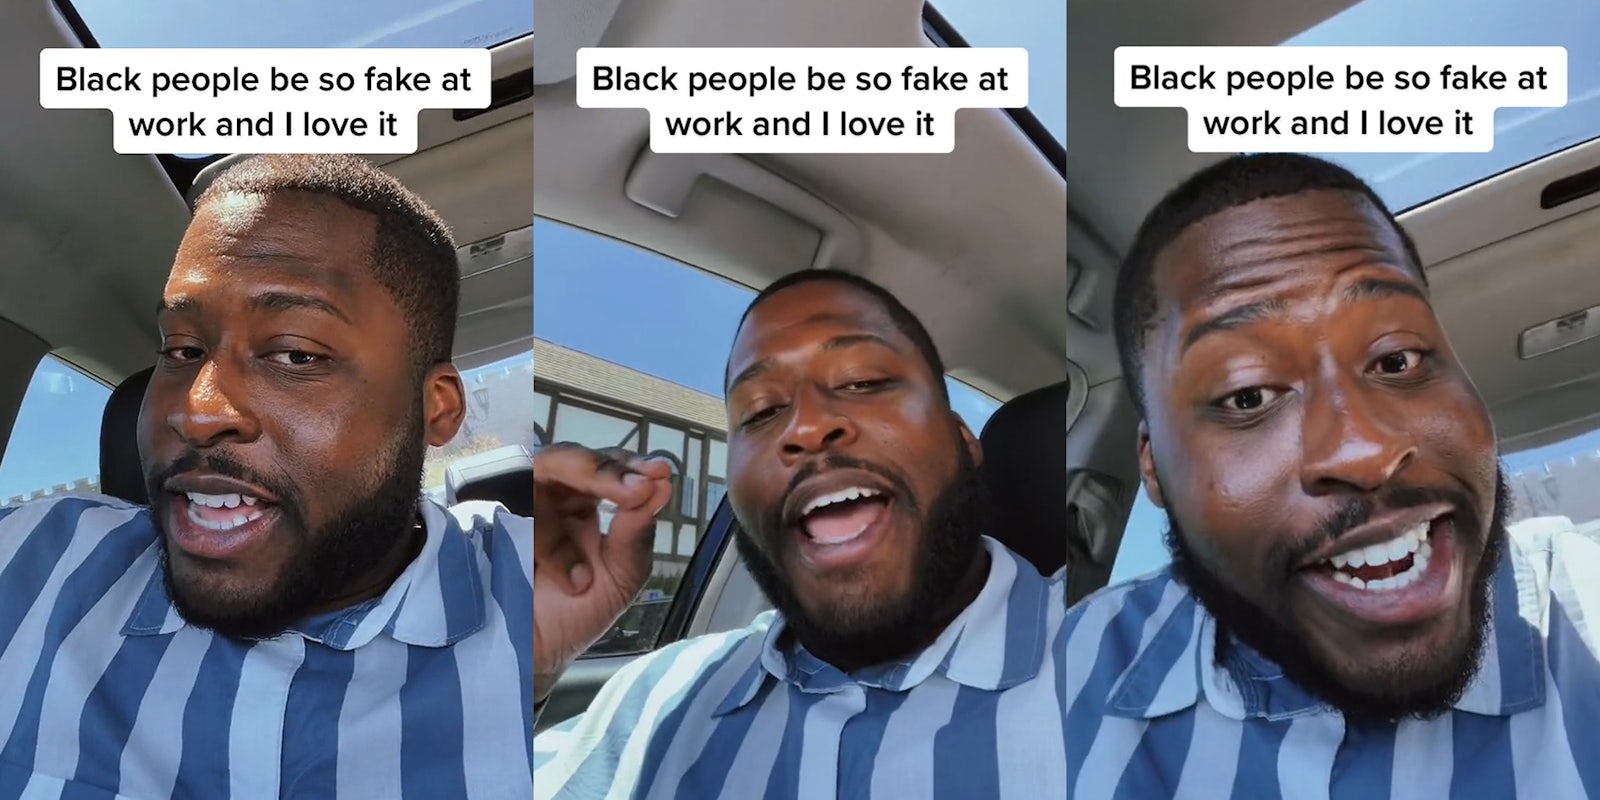 man speaking in car caption 'Black people be so fake at work and I love it' (l) man speaking in car caption 'Black people be so fake at work and I love it' (c) man speaking in car caption 'Black people be so fake at work and I love it' (r)